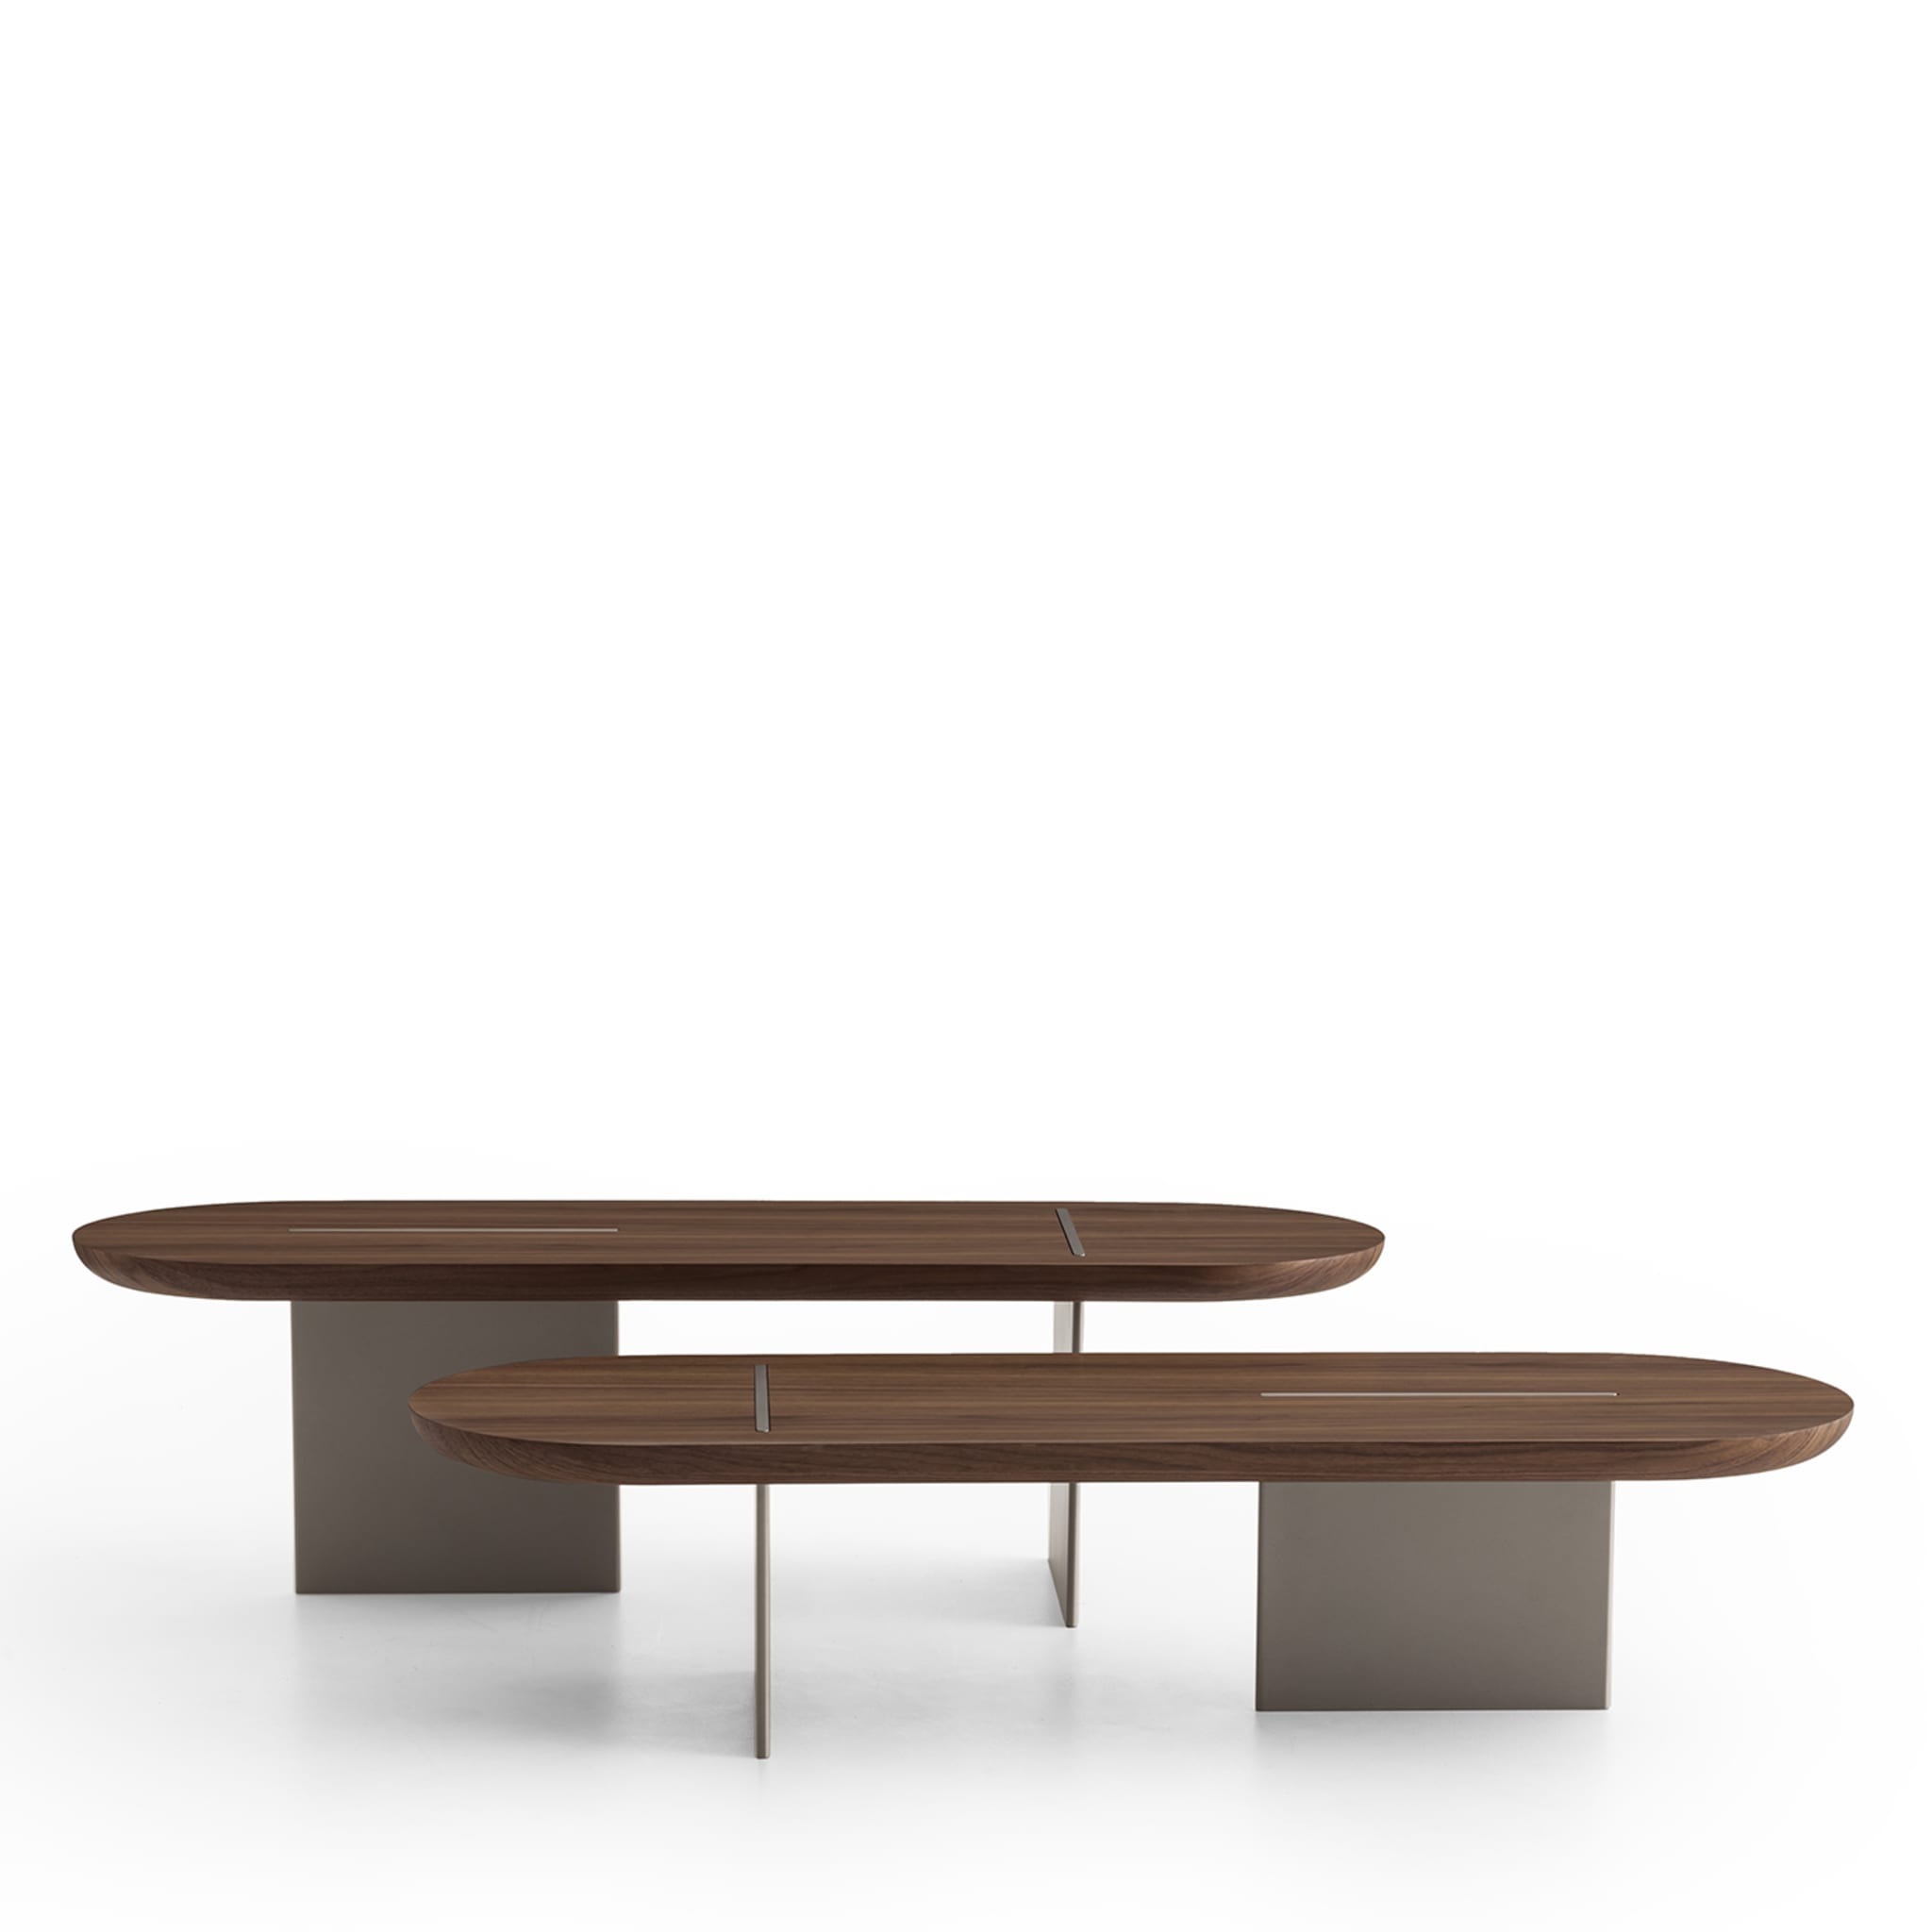 Baguette Tall Rounded Canaletto Walnut Coffee Table - Alternative view 1